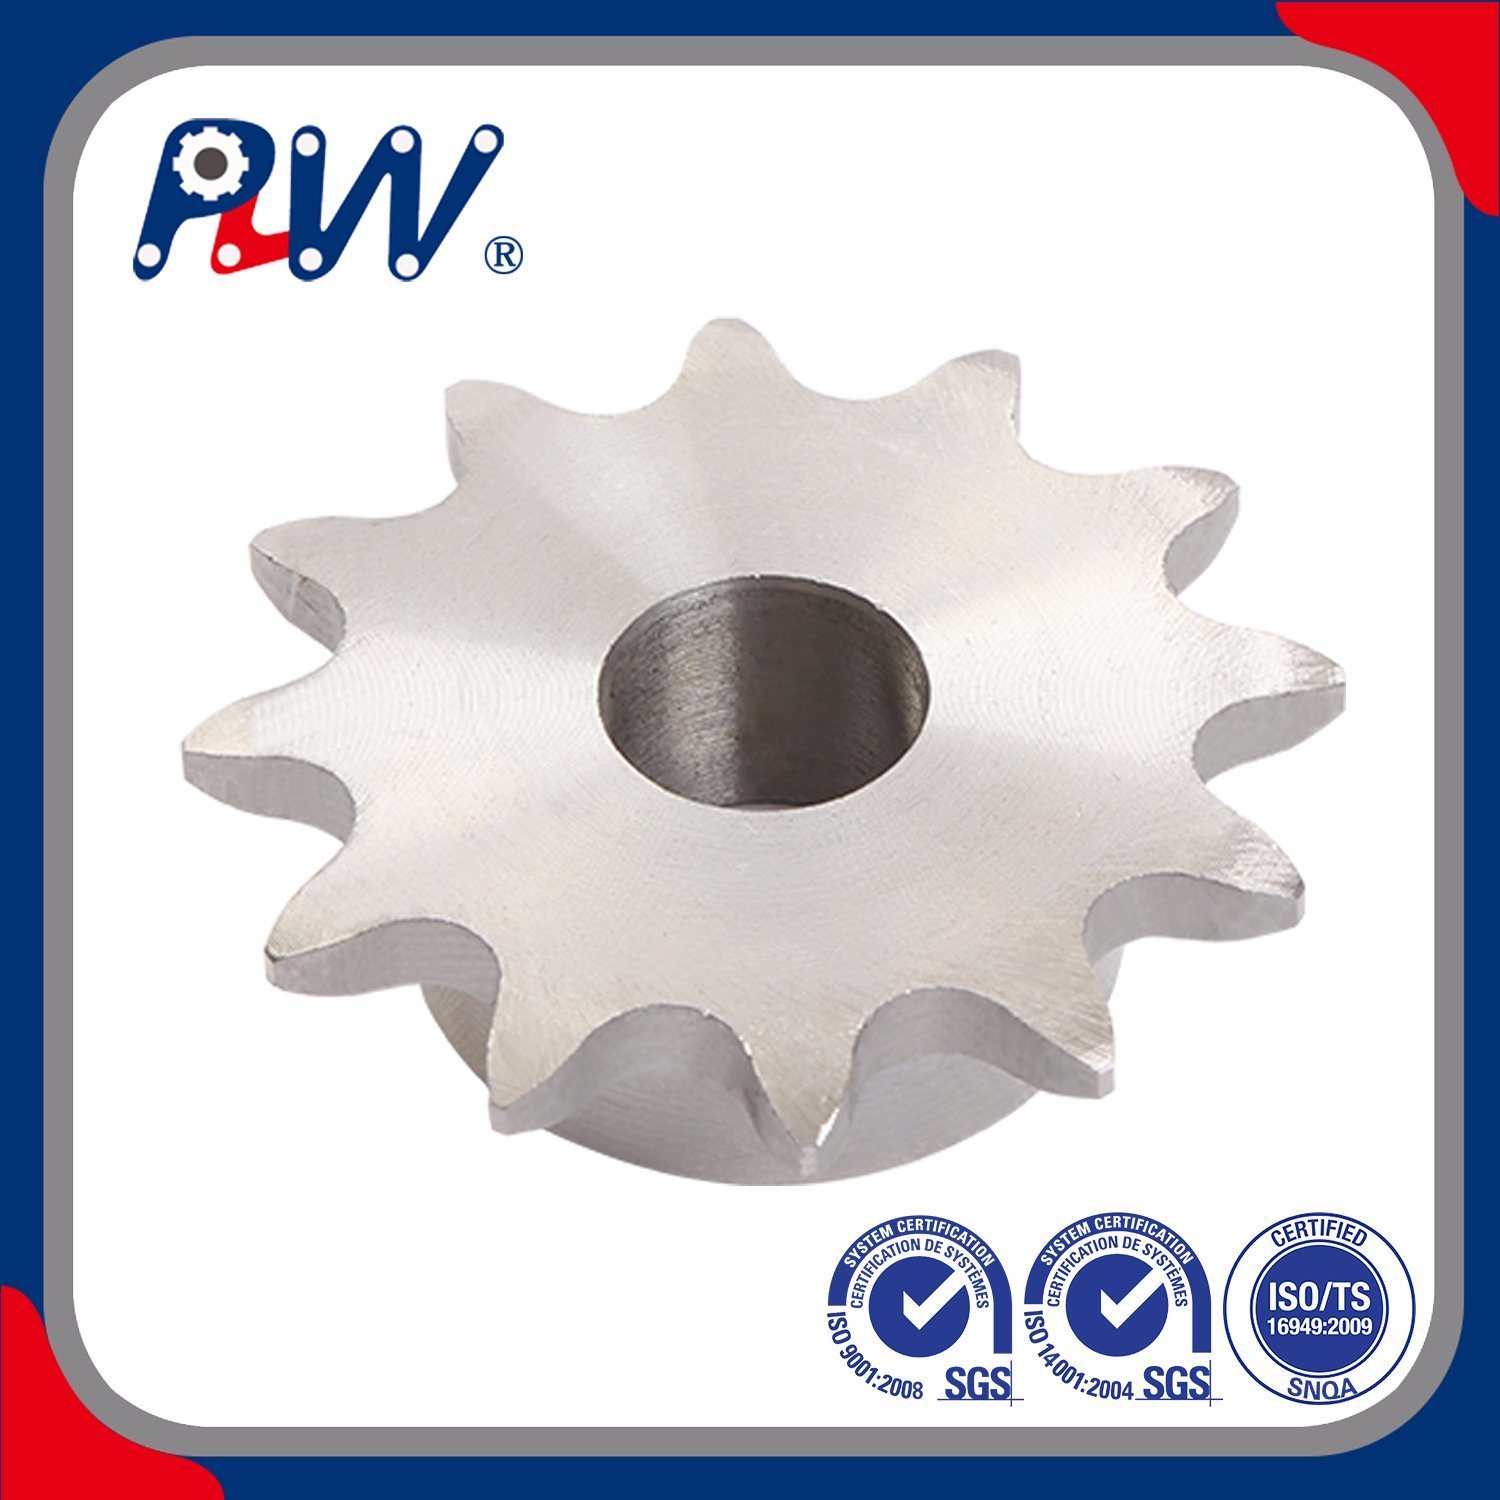 High Frequency Quenching Lost Wax Casting and Accessories Agricultural Machinery Stainless Steel Industry Sprocket